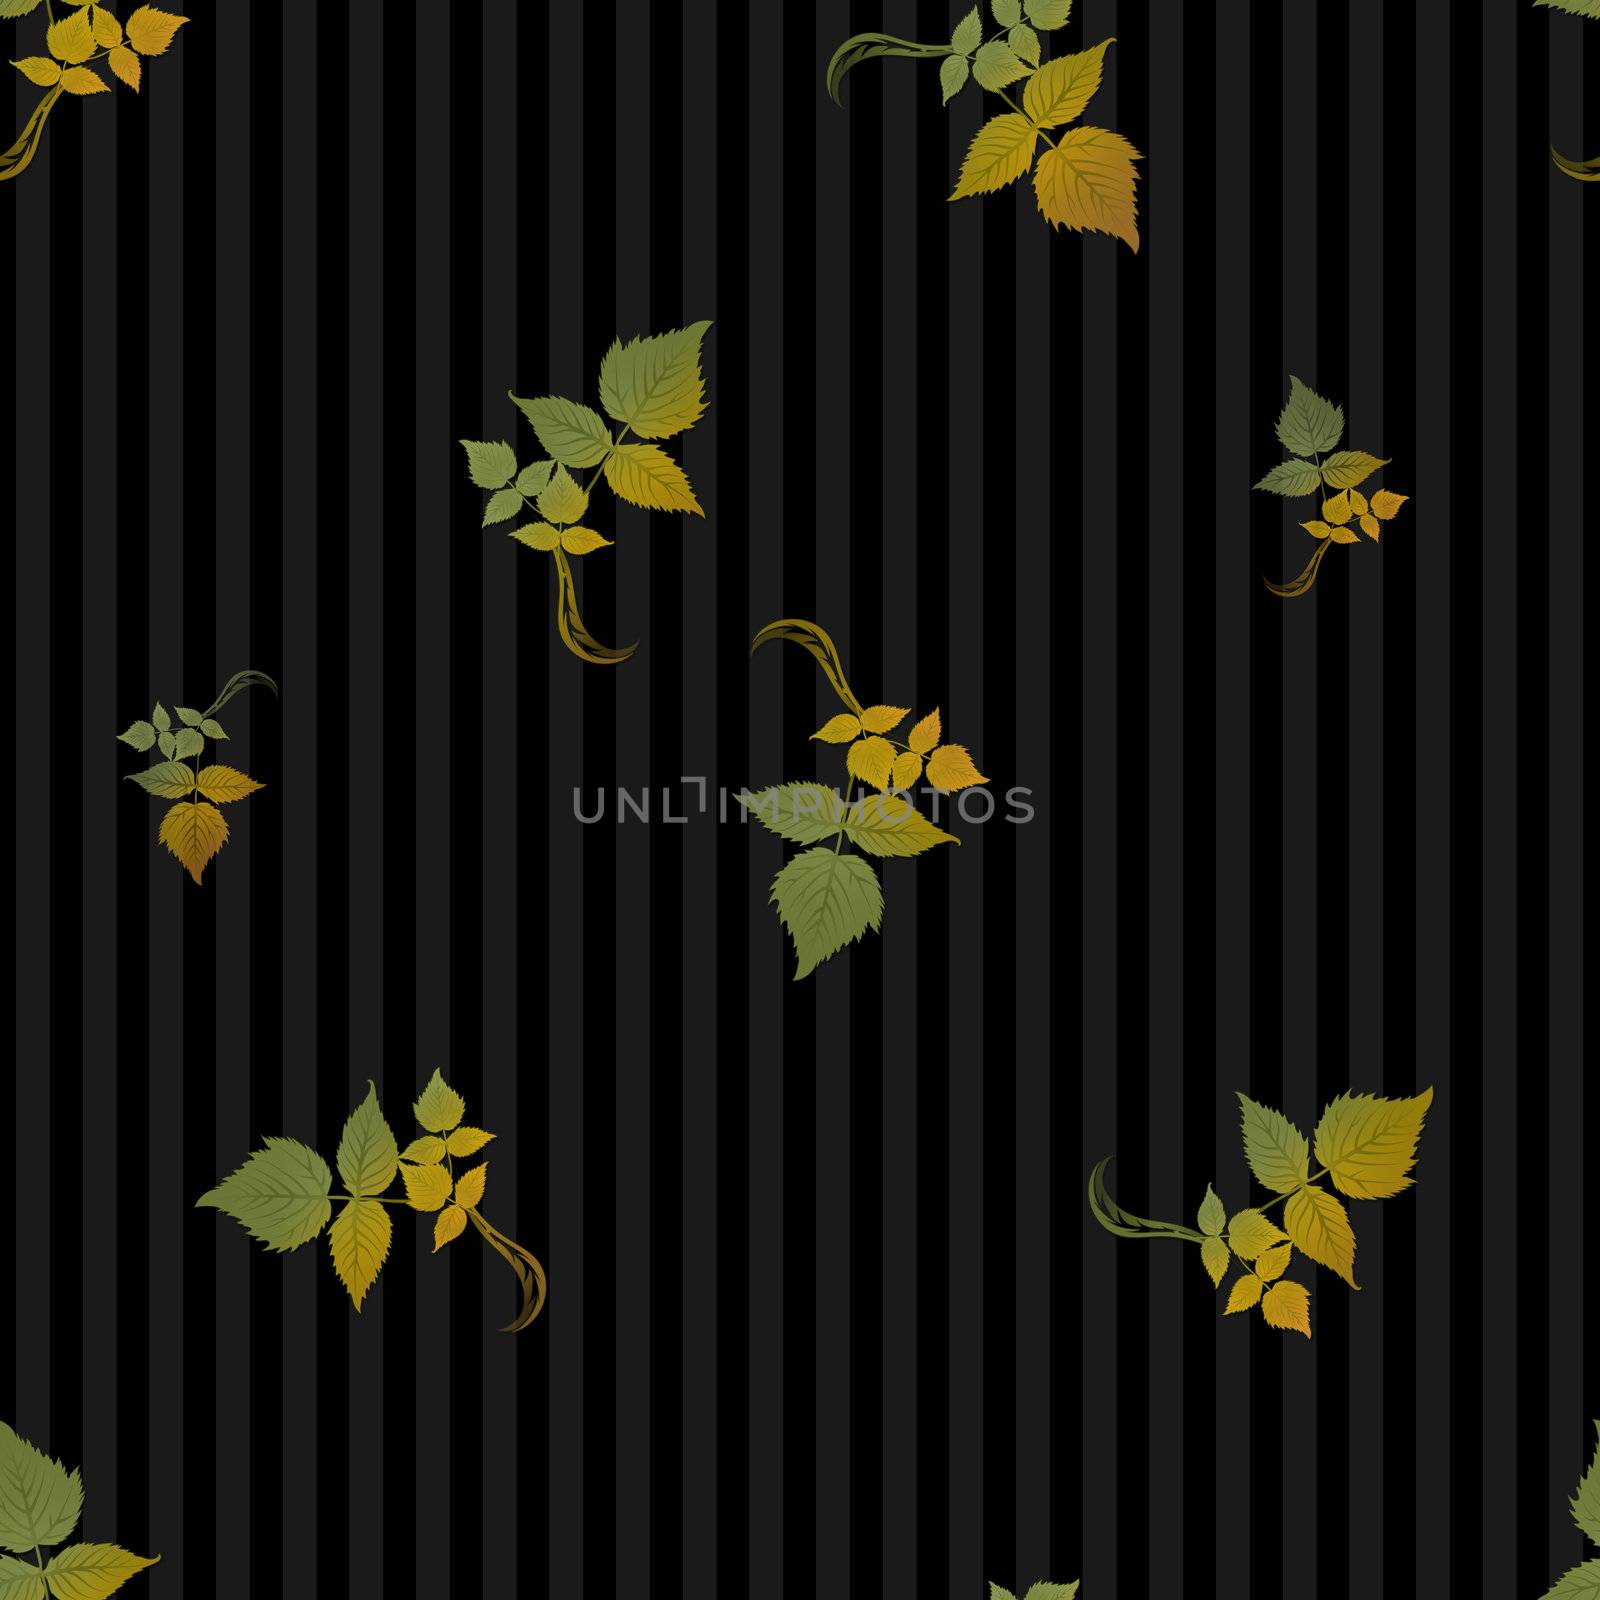 Leaves in shades of green, gold, and orange scatter seamlessly on black striped background